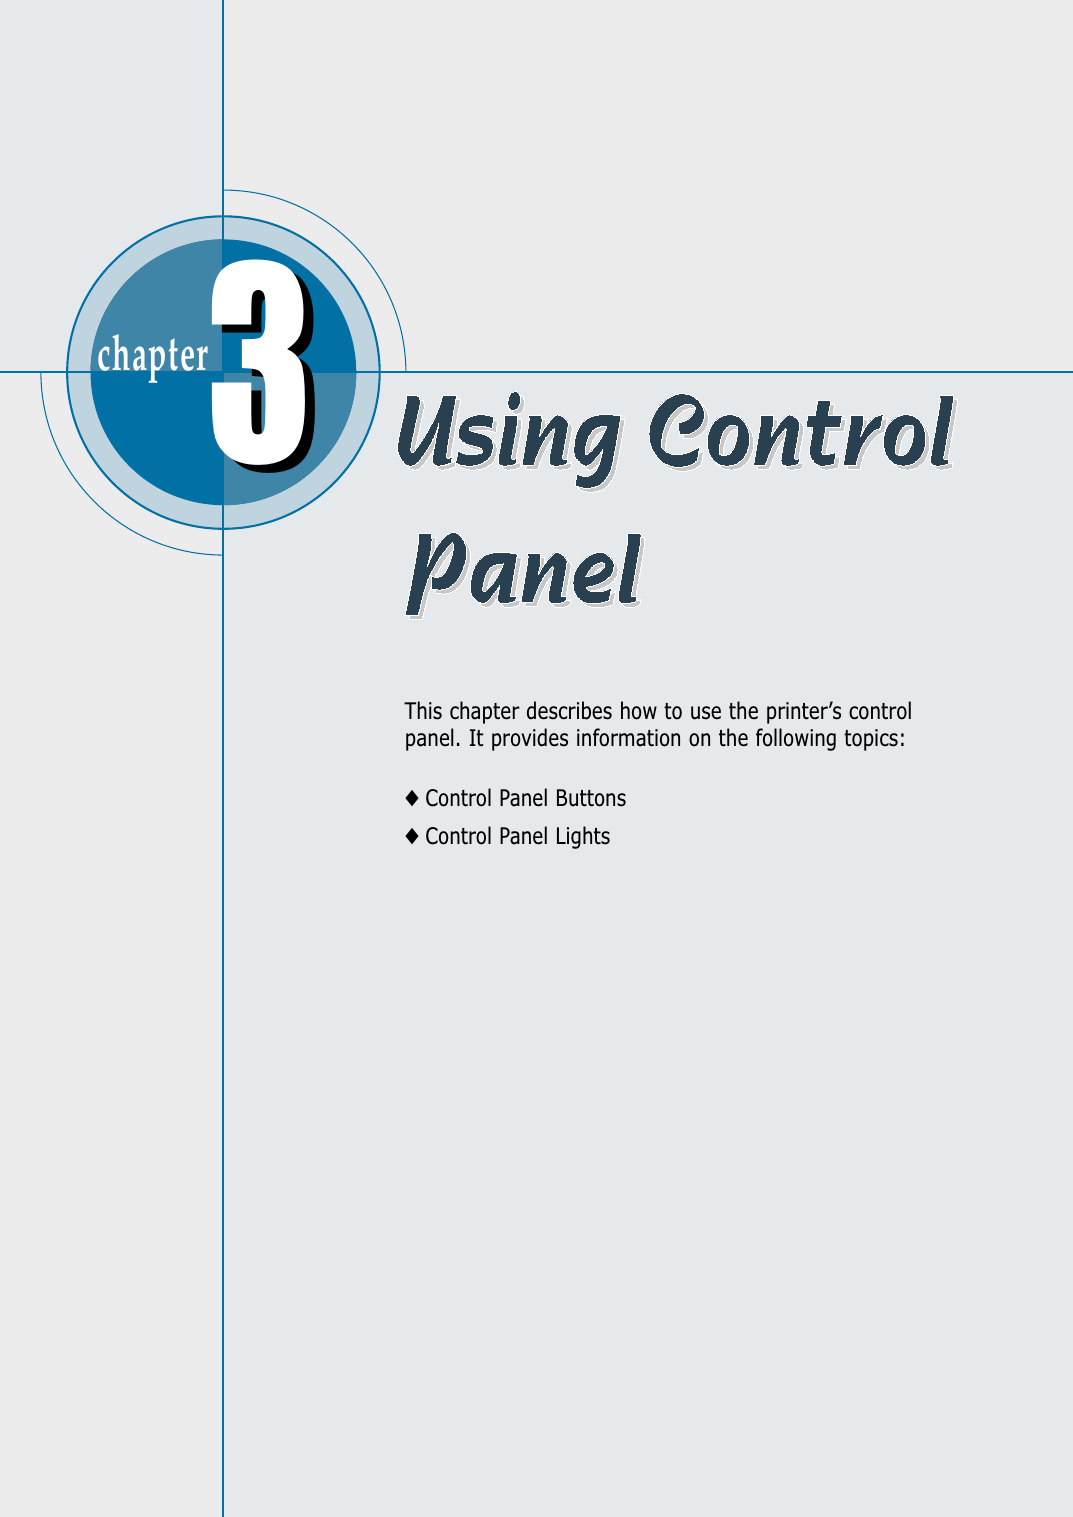 chapter  This chapter describes how to use the printer’s controlpanel. It provides information on the following topics:◆Control Panel Buttons◆Control Panel Lights33